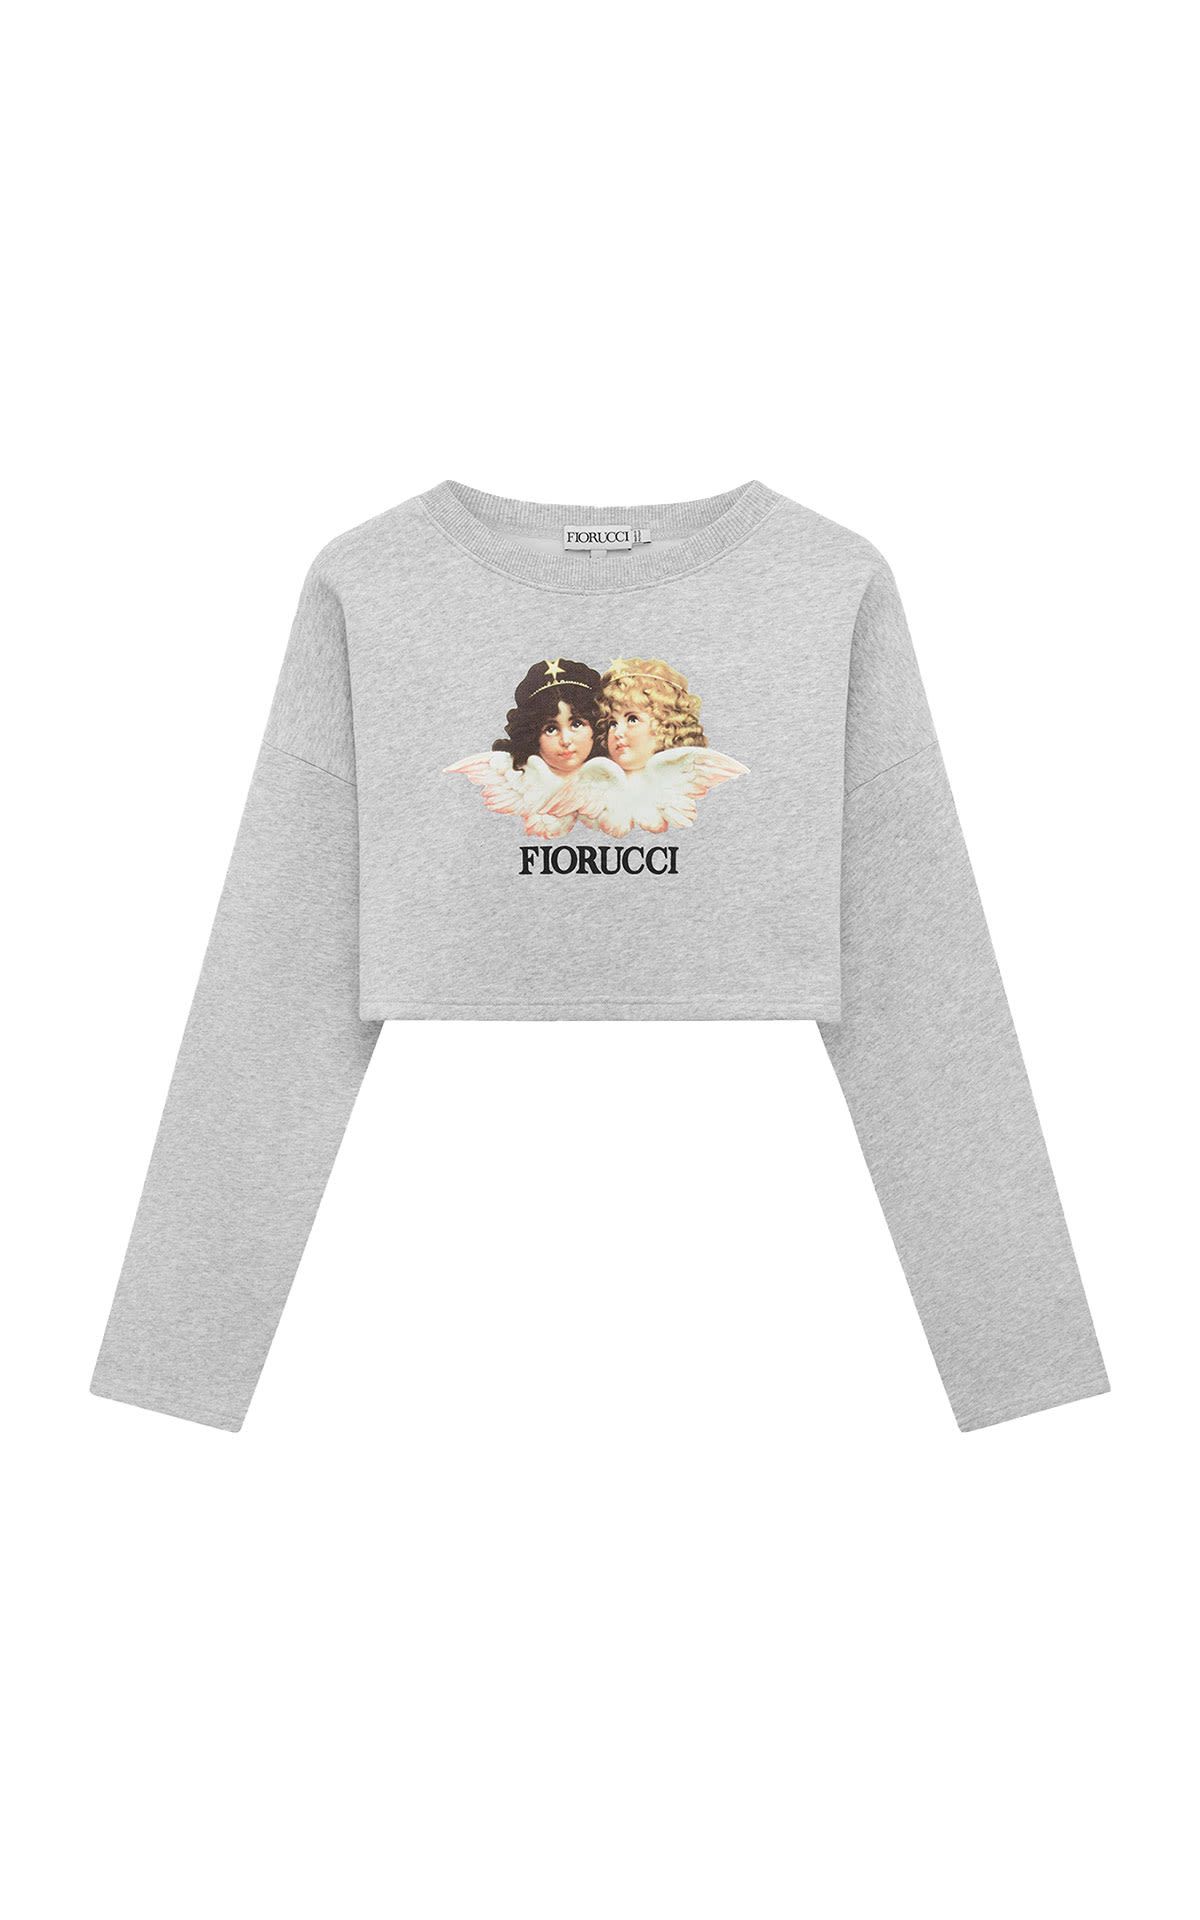 Fiorucci Vintage angels cropped sweat from Bicester Village